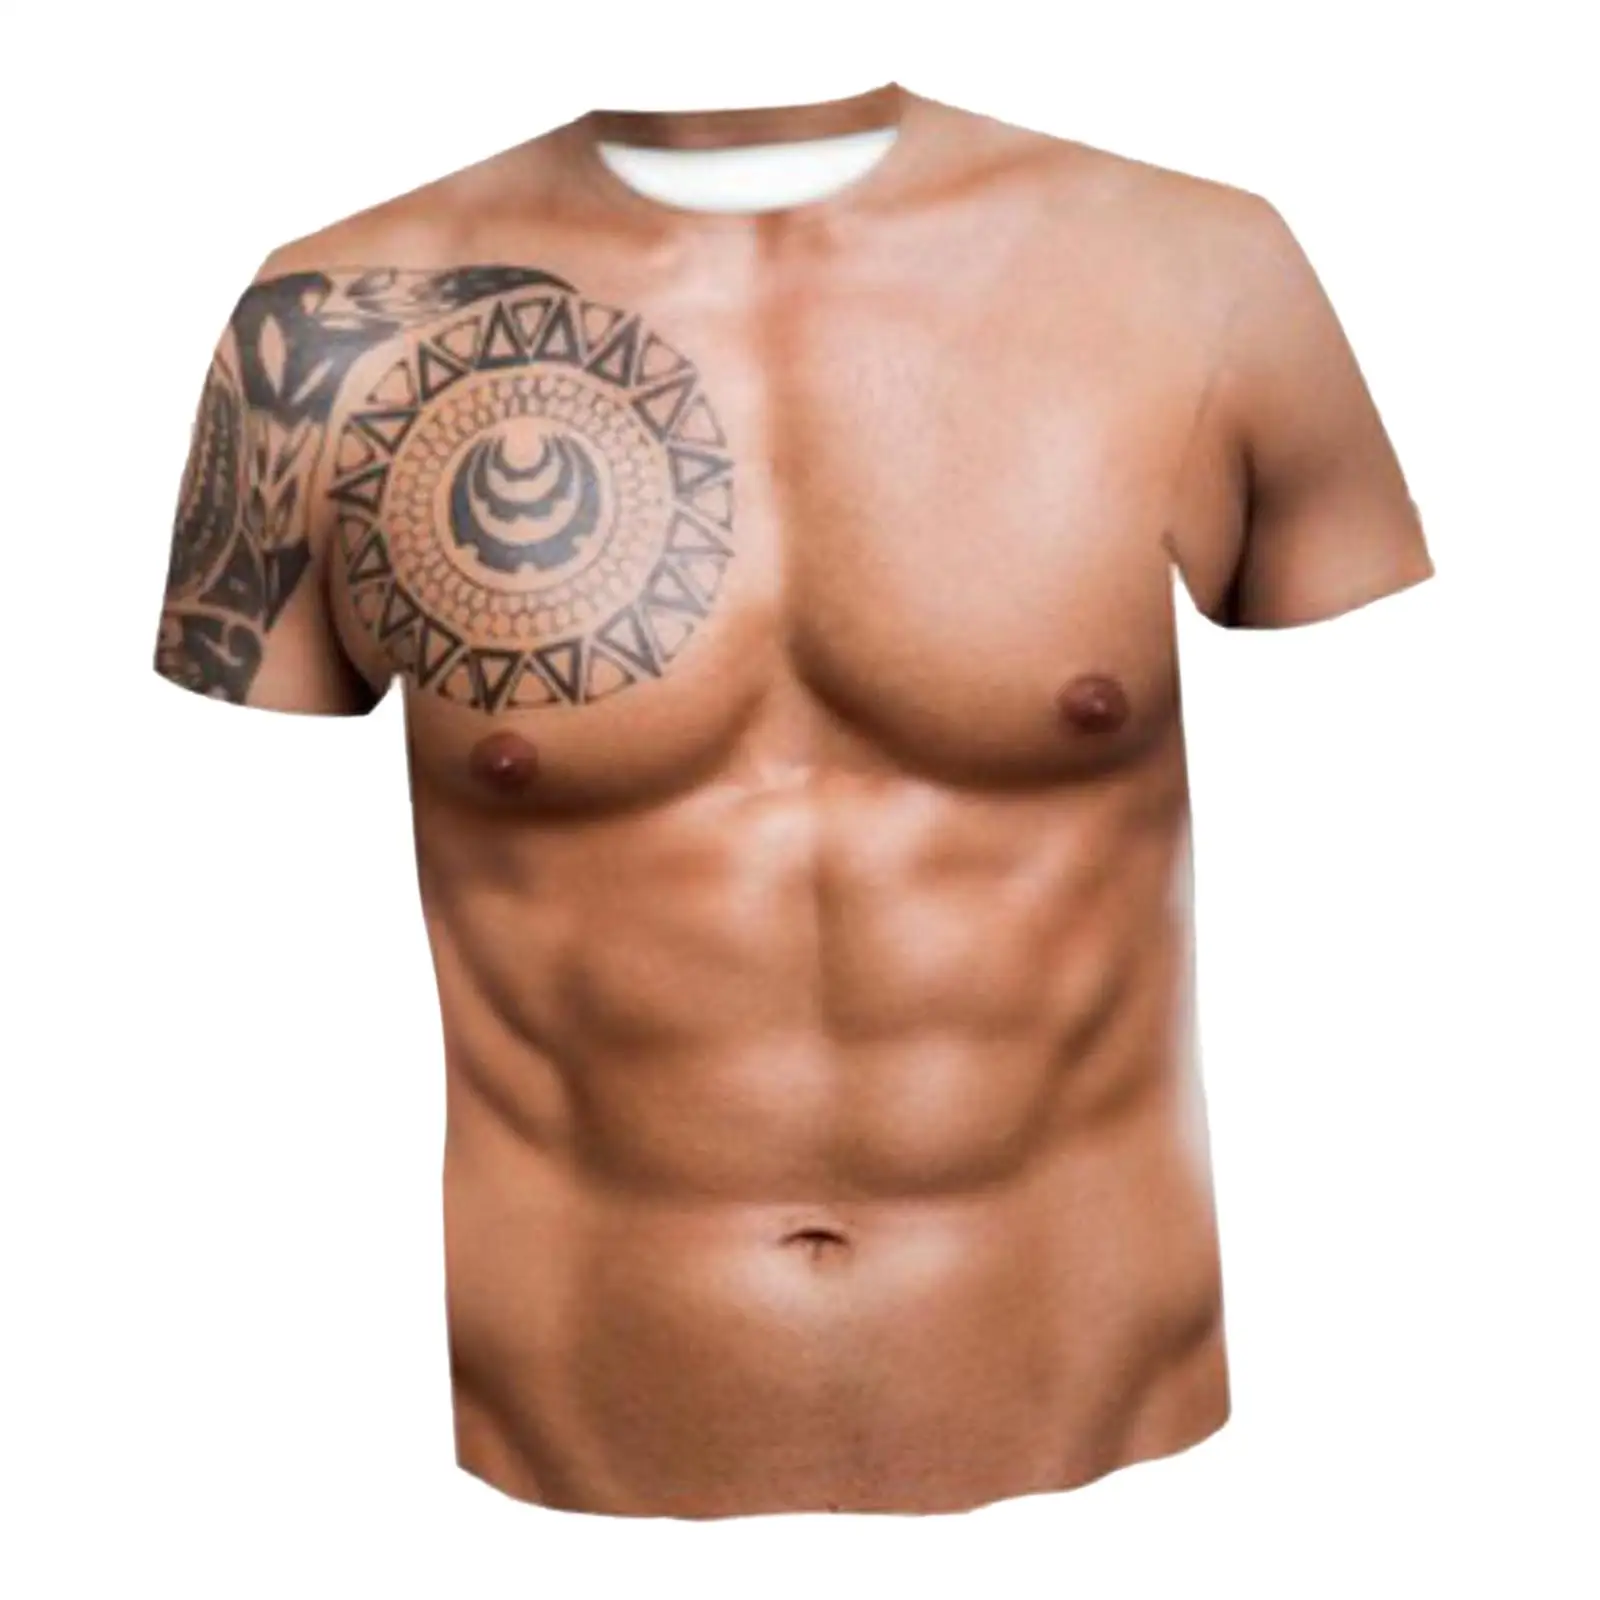 Round Neck Men's Muscle T Shirt Tee Tops Fake Muscle Shirts Strongman Graphic 3D Print Patterned Short Sleeve for Outdoor Sports